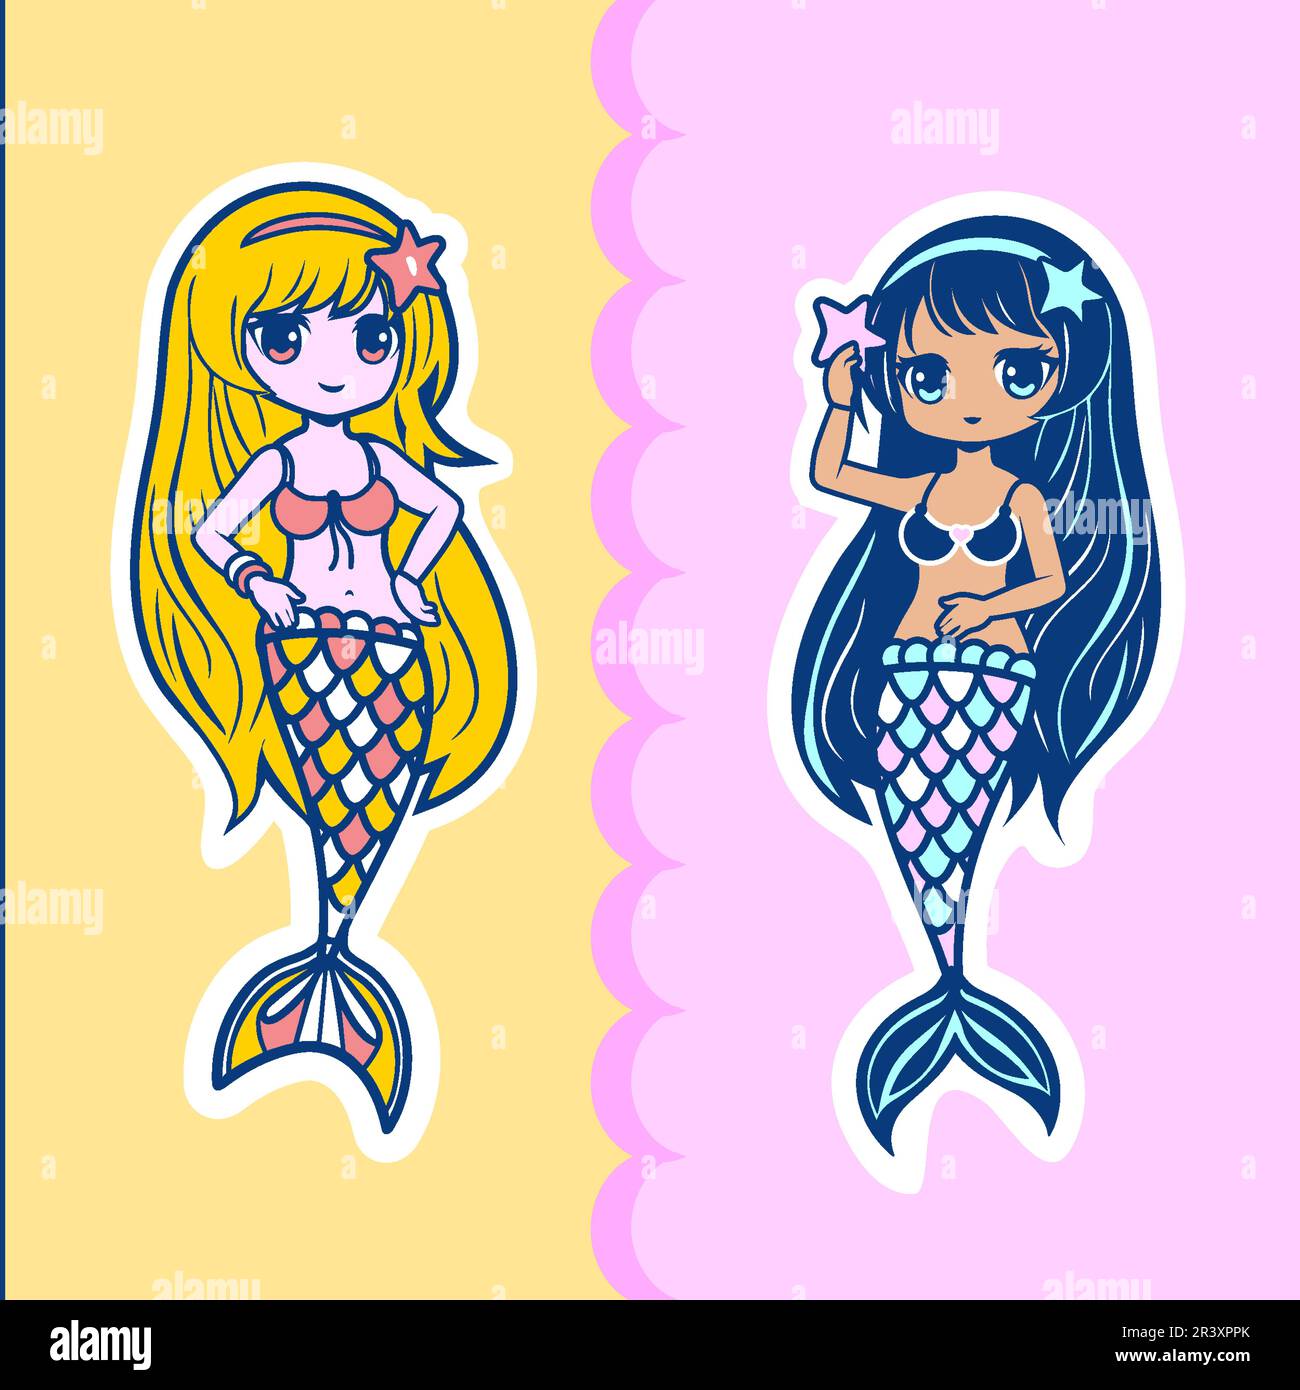 Little mermaid is blonde and the little mermaid is brunette with dark skin. Cute mermaid stickers for design. Vector illustration. Stock Vector